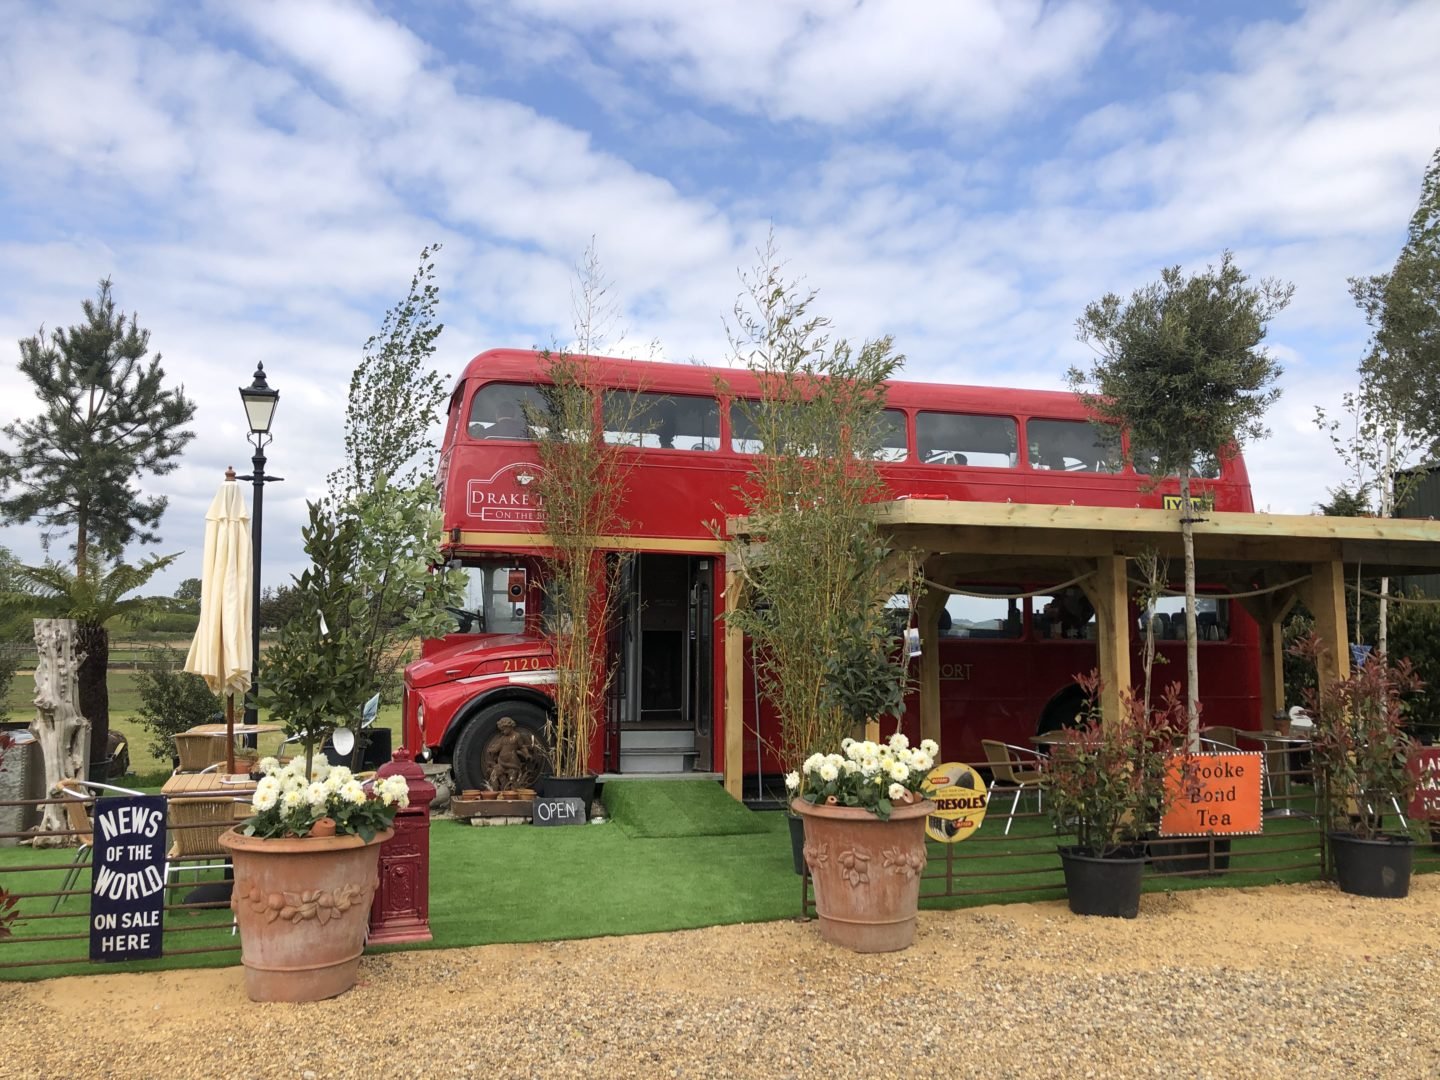 Drakes Teas on the Bus a London Bus Tea Room in Essex ,There is a perfect spot for a cup of tea and a slice of cake at Drakes Teas On The Bus in Battlesbridge Essex. Drakes Teas On The Bus is a quirky tea room all on a route master London transport bus. 